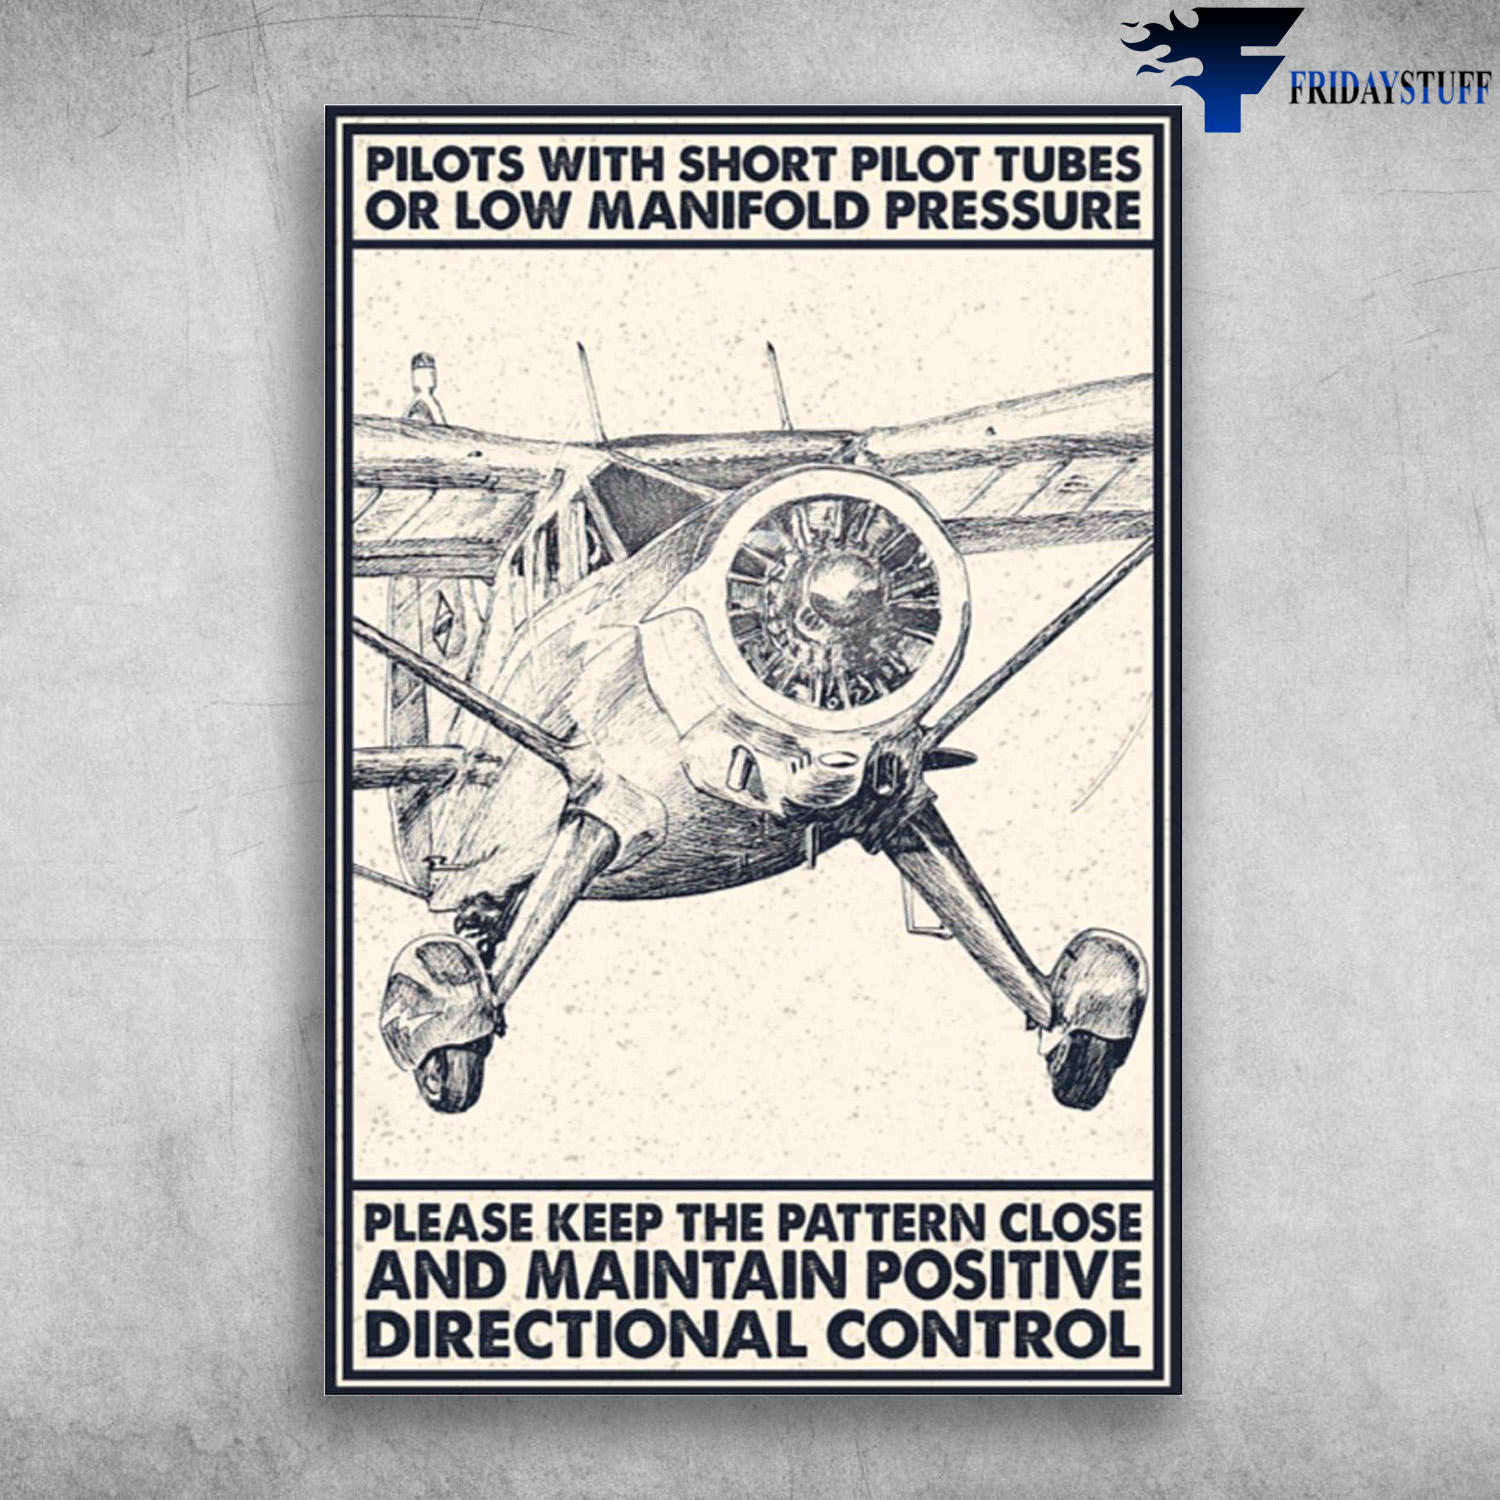 The Aircraft - Pilots With Short Pilot Tubes, Or Low Manifold Pressure, Please Keep The Pattern Close, And Maintain Positive, Directional Control